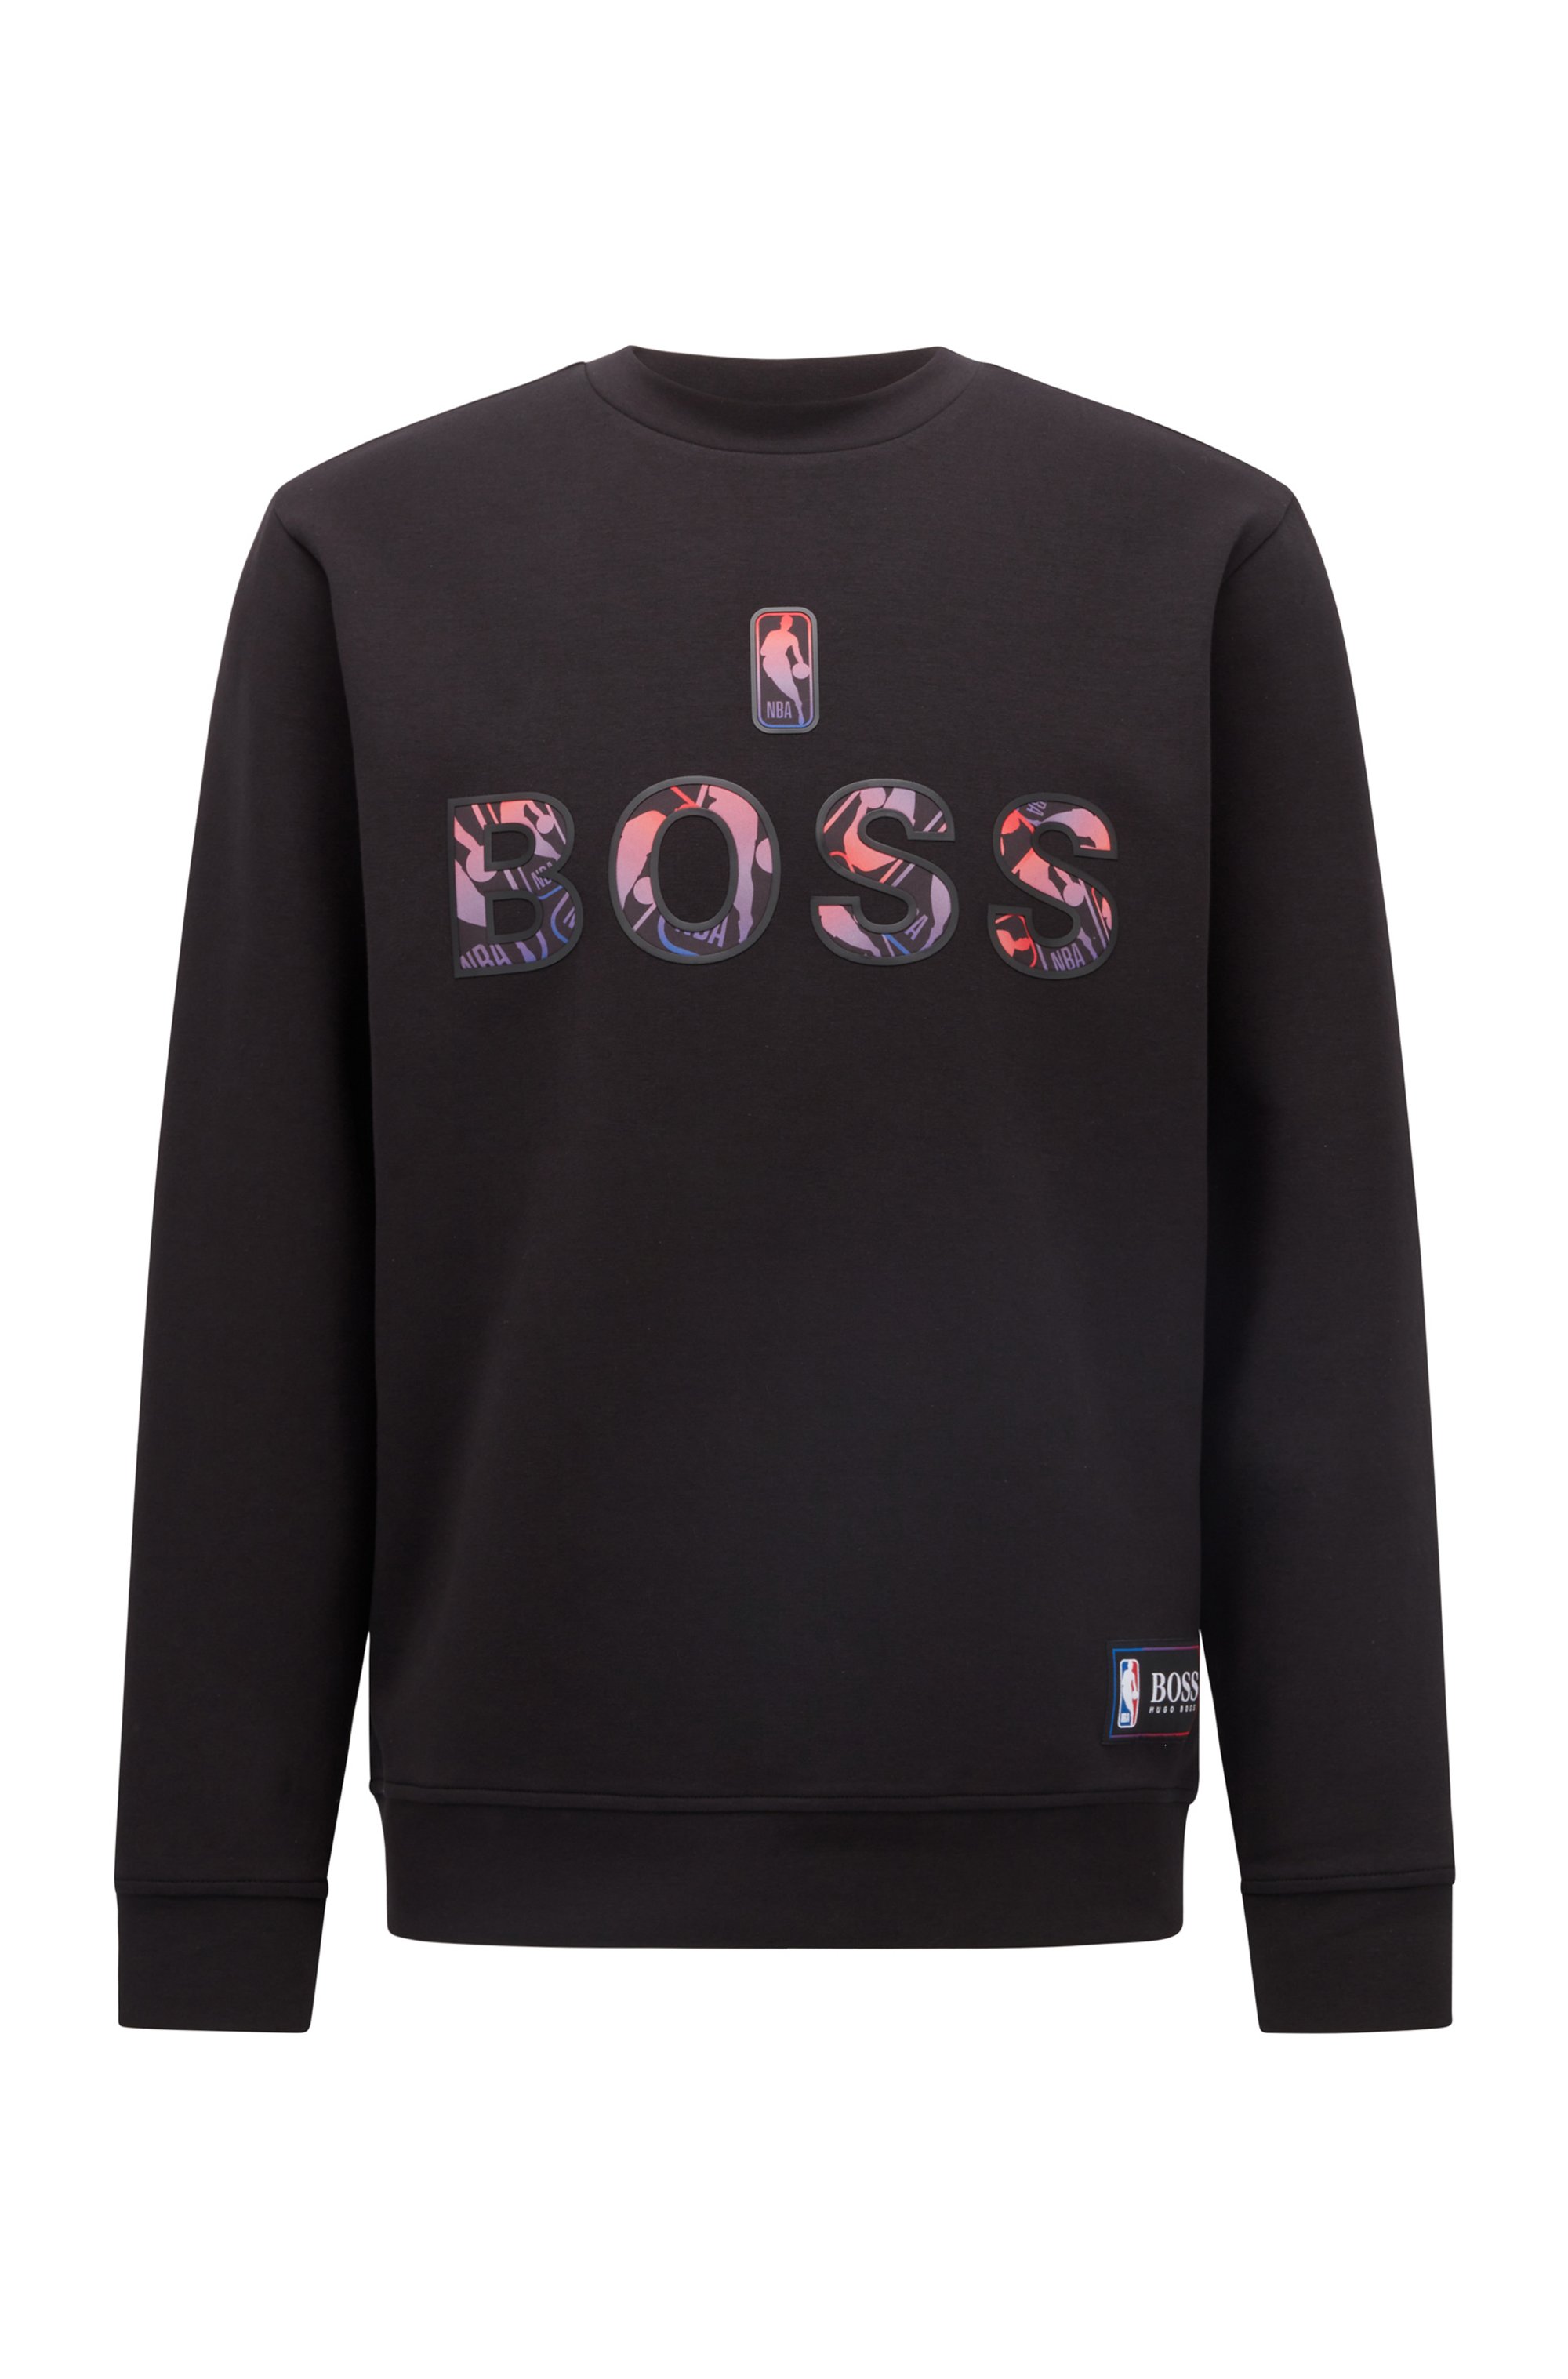 BOSS x NBA relaxed-fit sweatshirt with colorful branding, NBA Generic